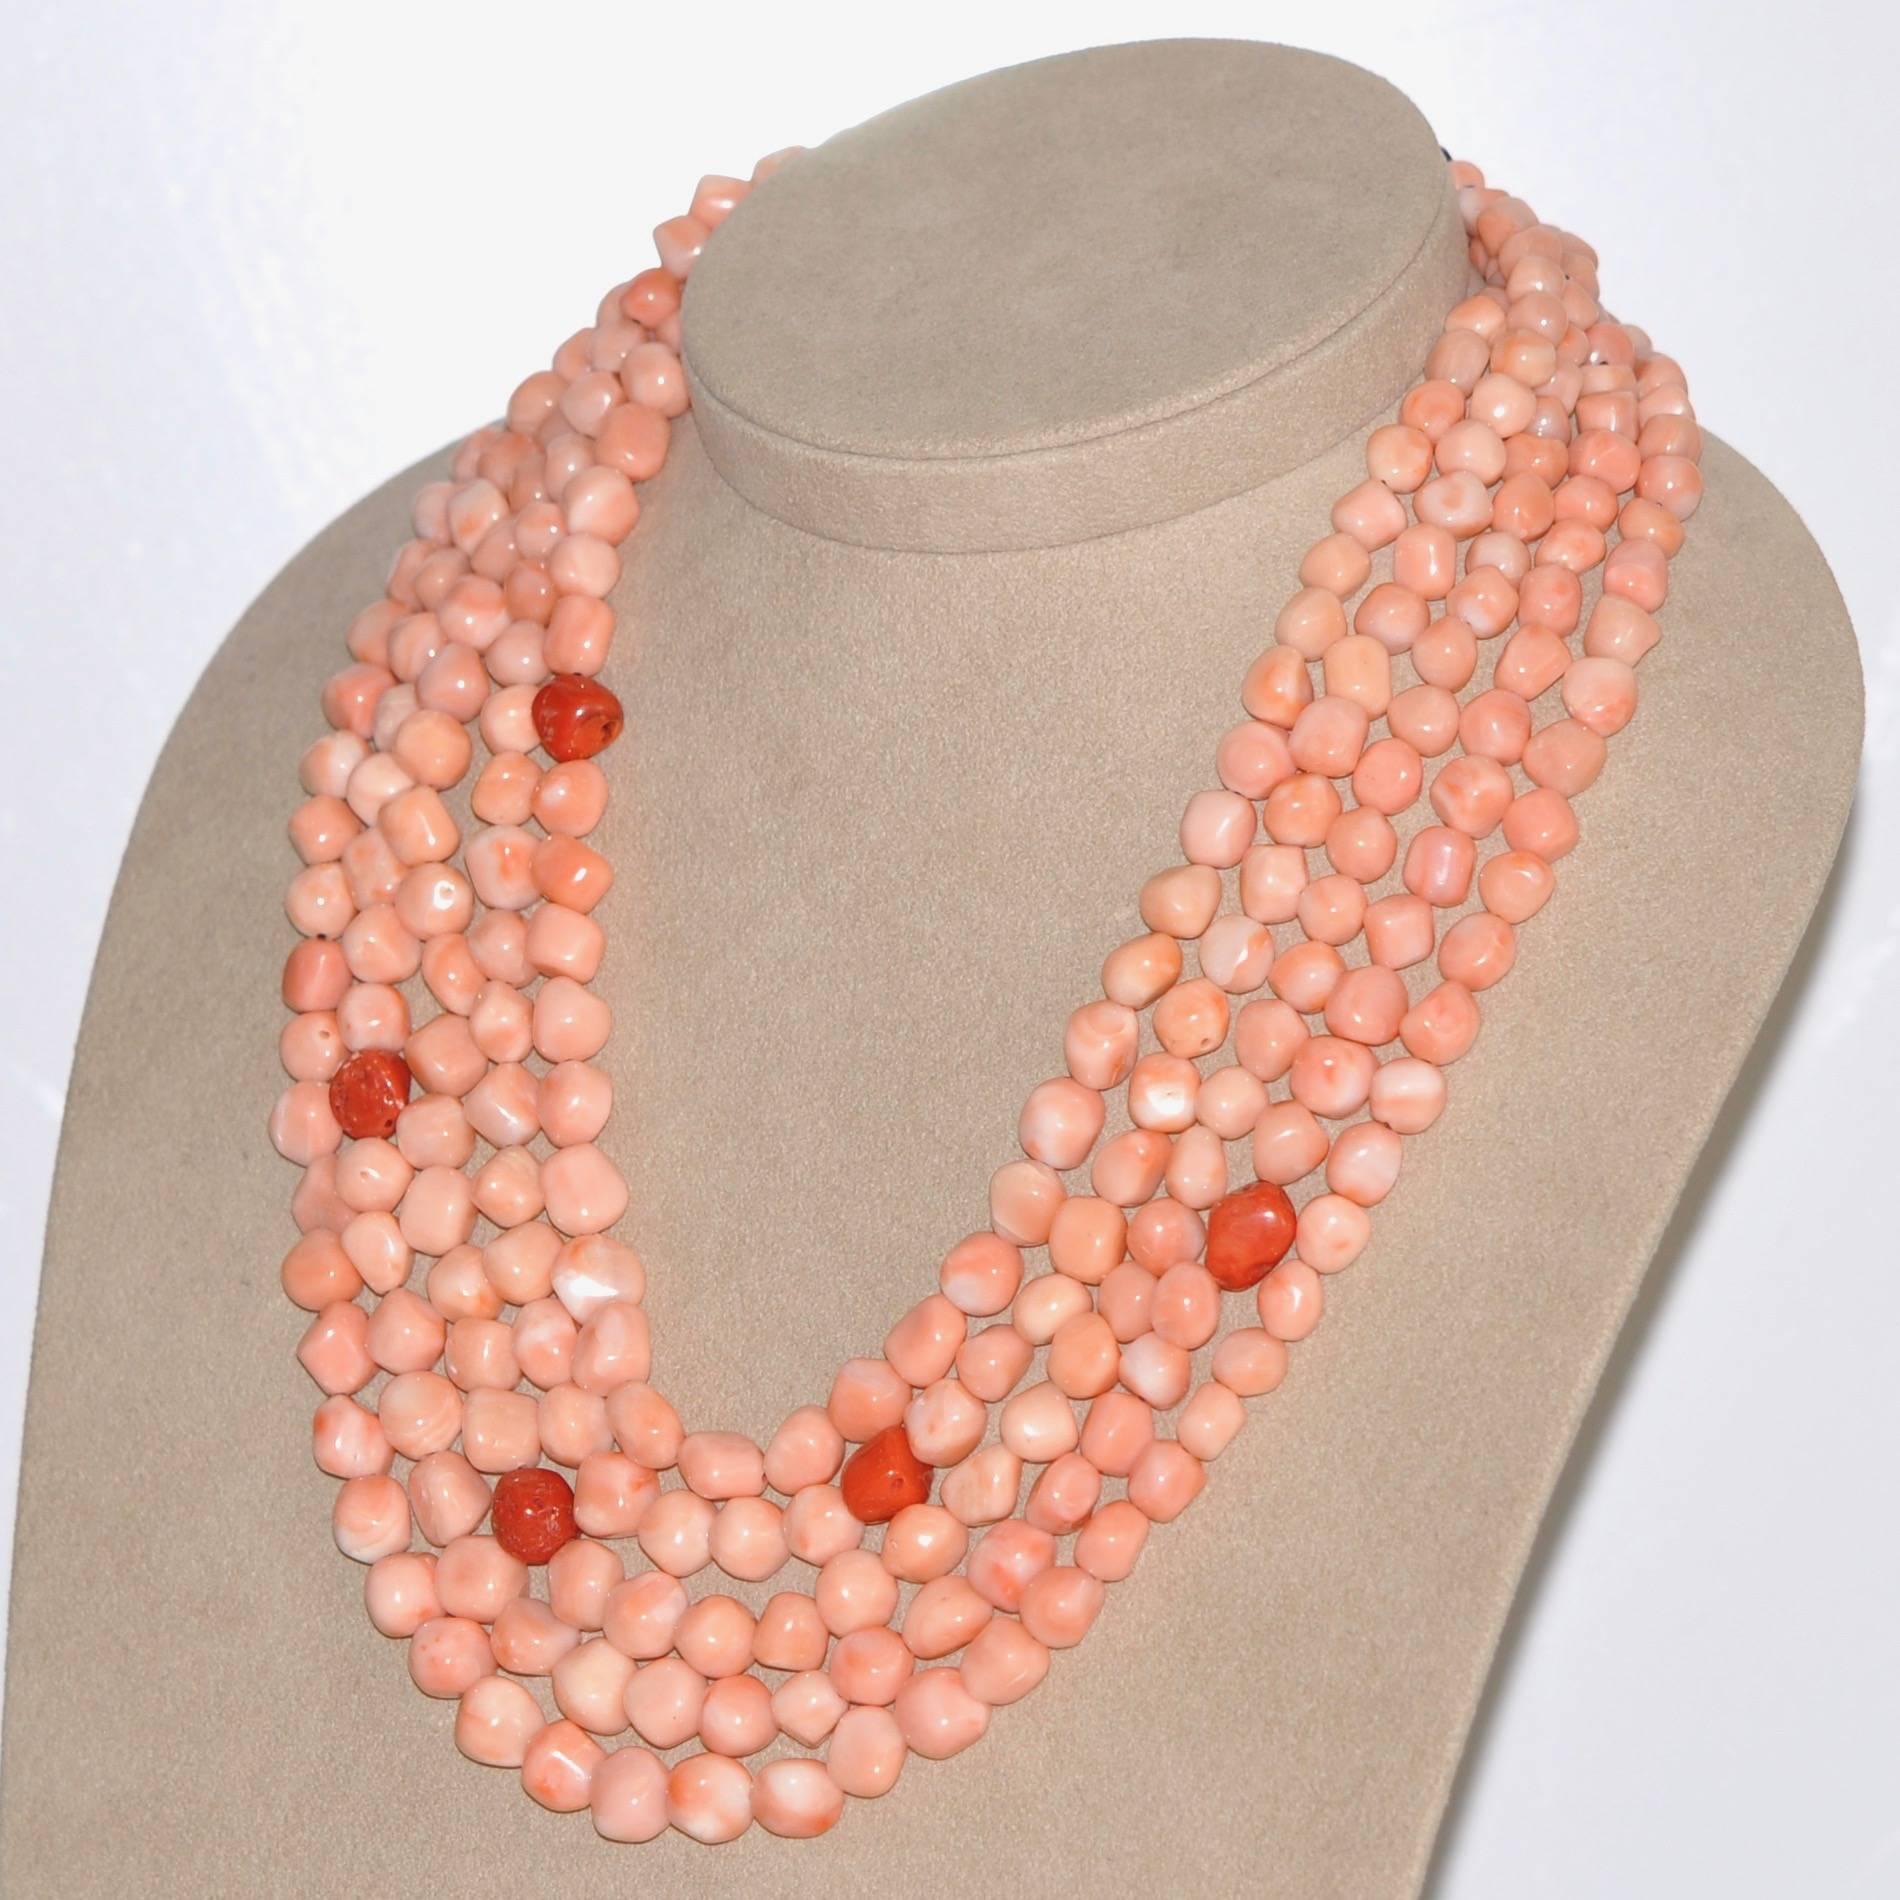 Discover this Pink and Red Coral, Bakelite Multi-Strand Necklace.
Pink Coral
Red Coral
Bakelite Clasp
